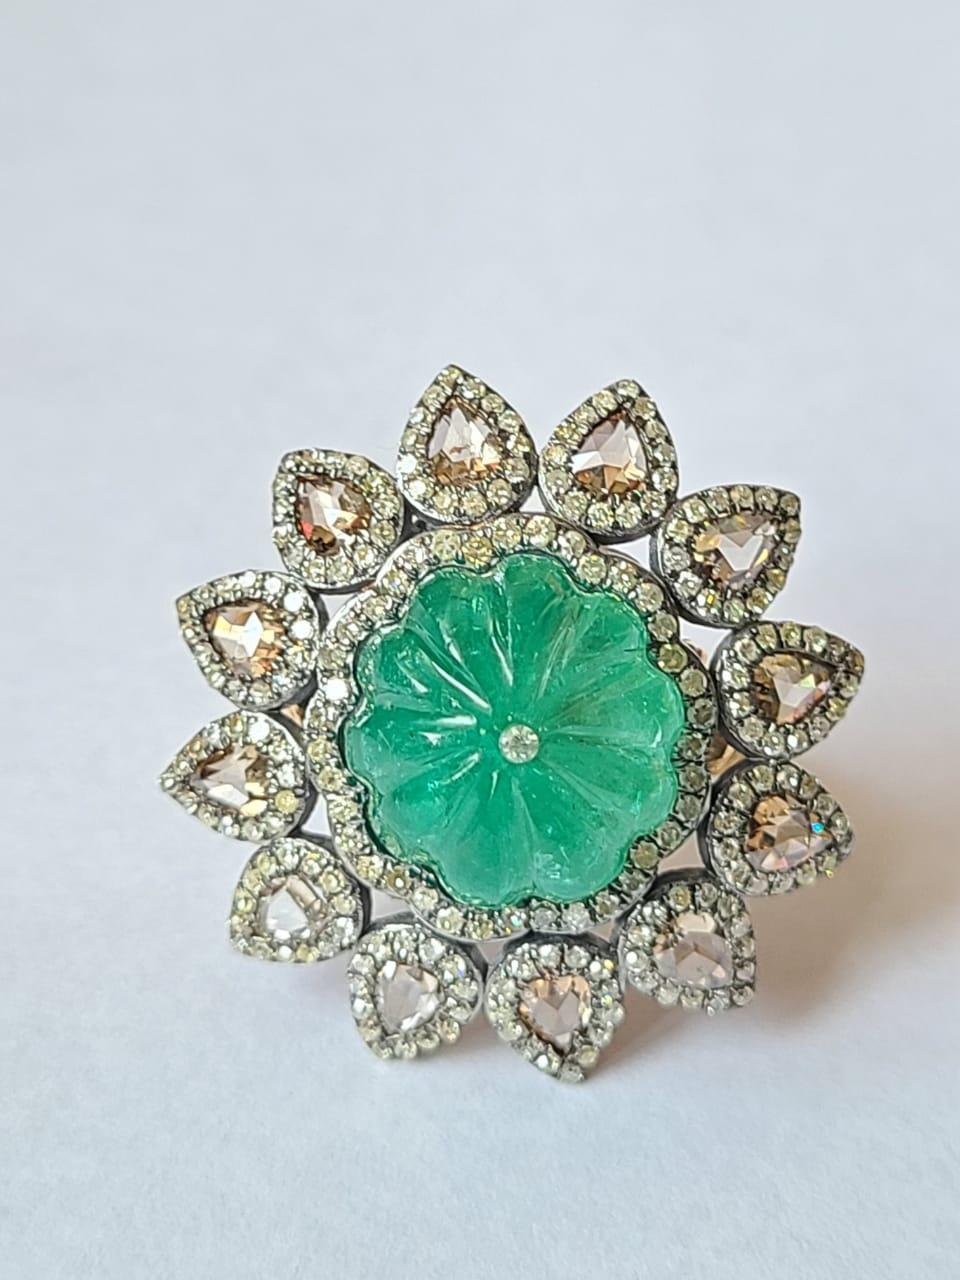 Natural, Carved Emerald & Rose Cut Diamonds Victorian / Art Deco Cocktail Ring 2